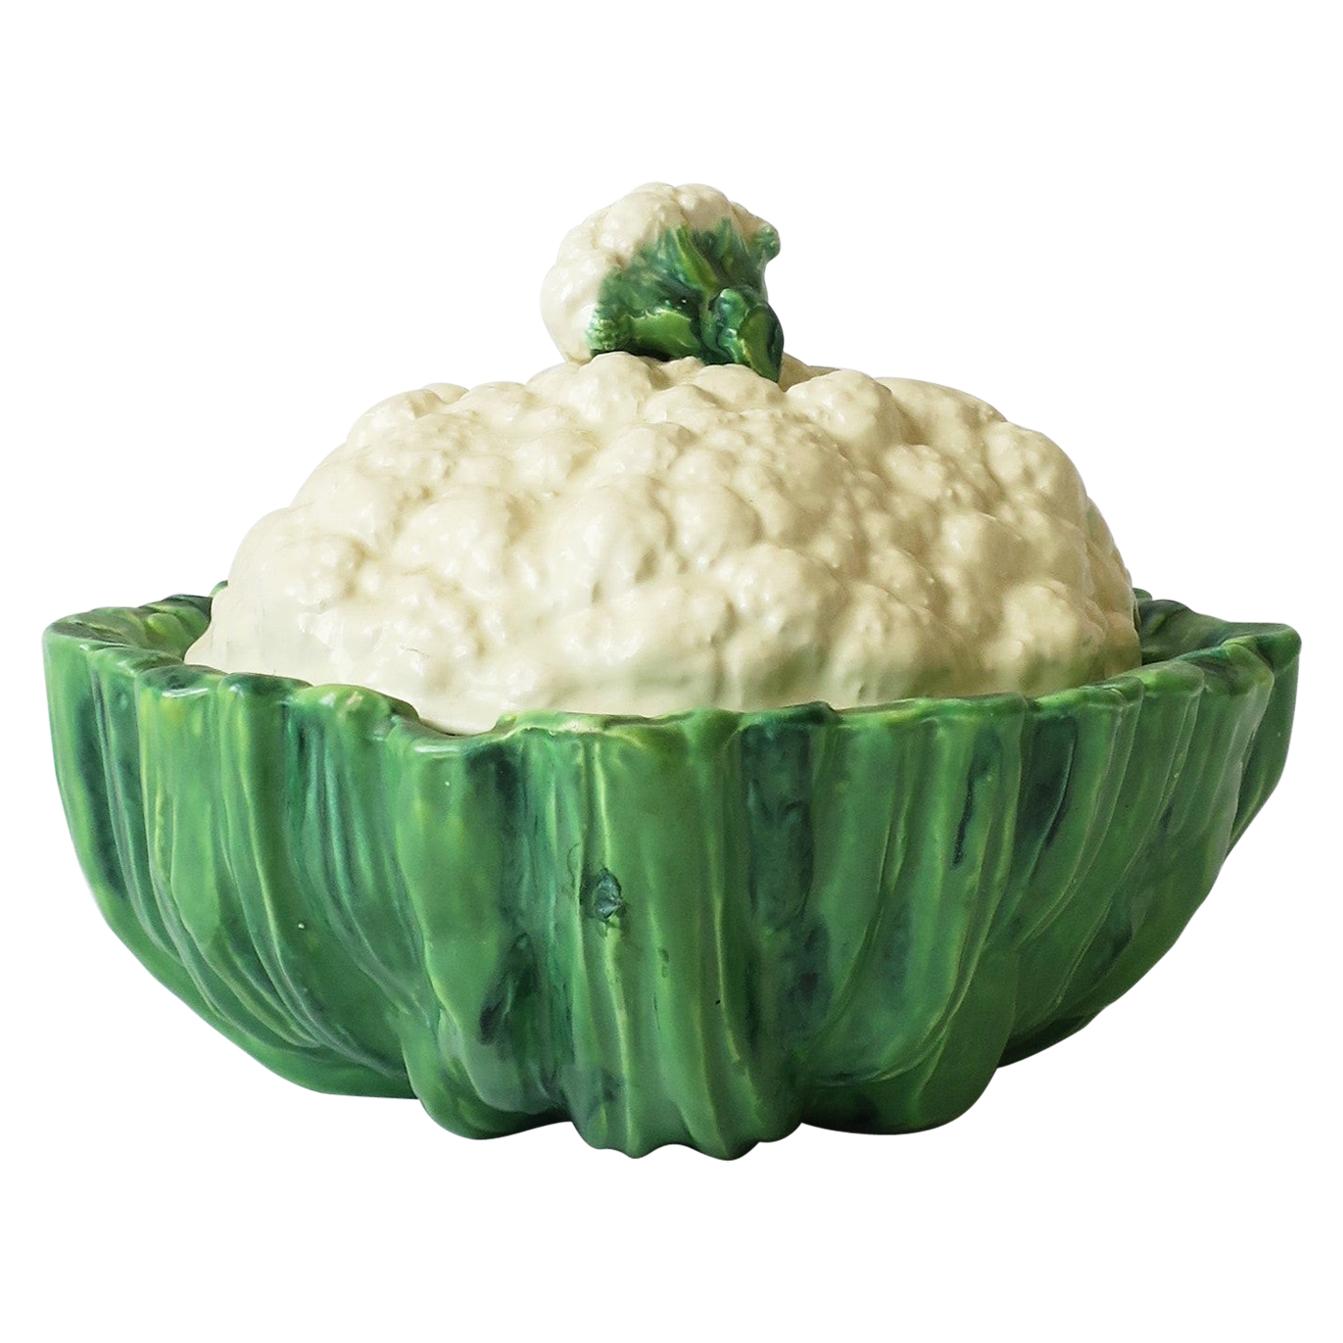 Cabbage Cauliflower Vegetable Soup Tureen Bowl in White and Green